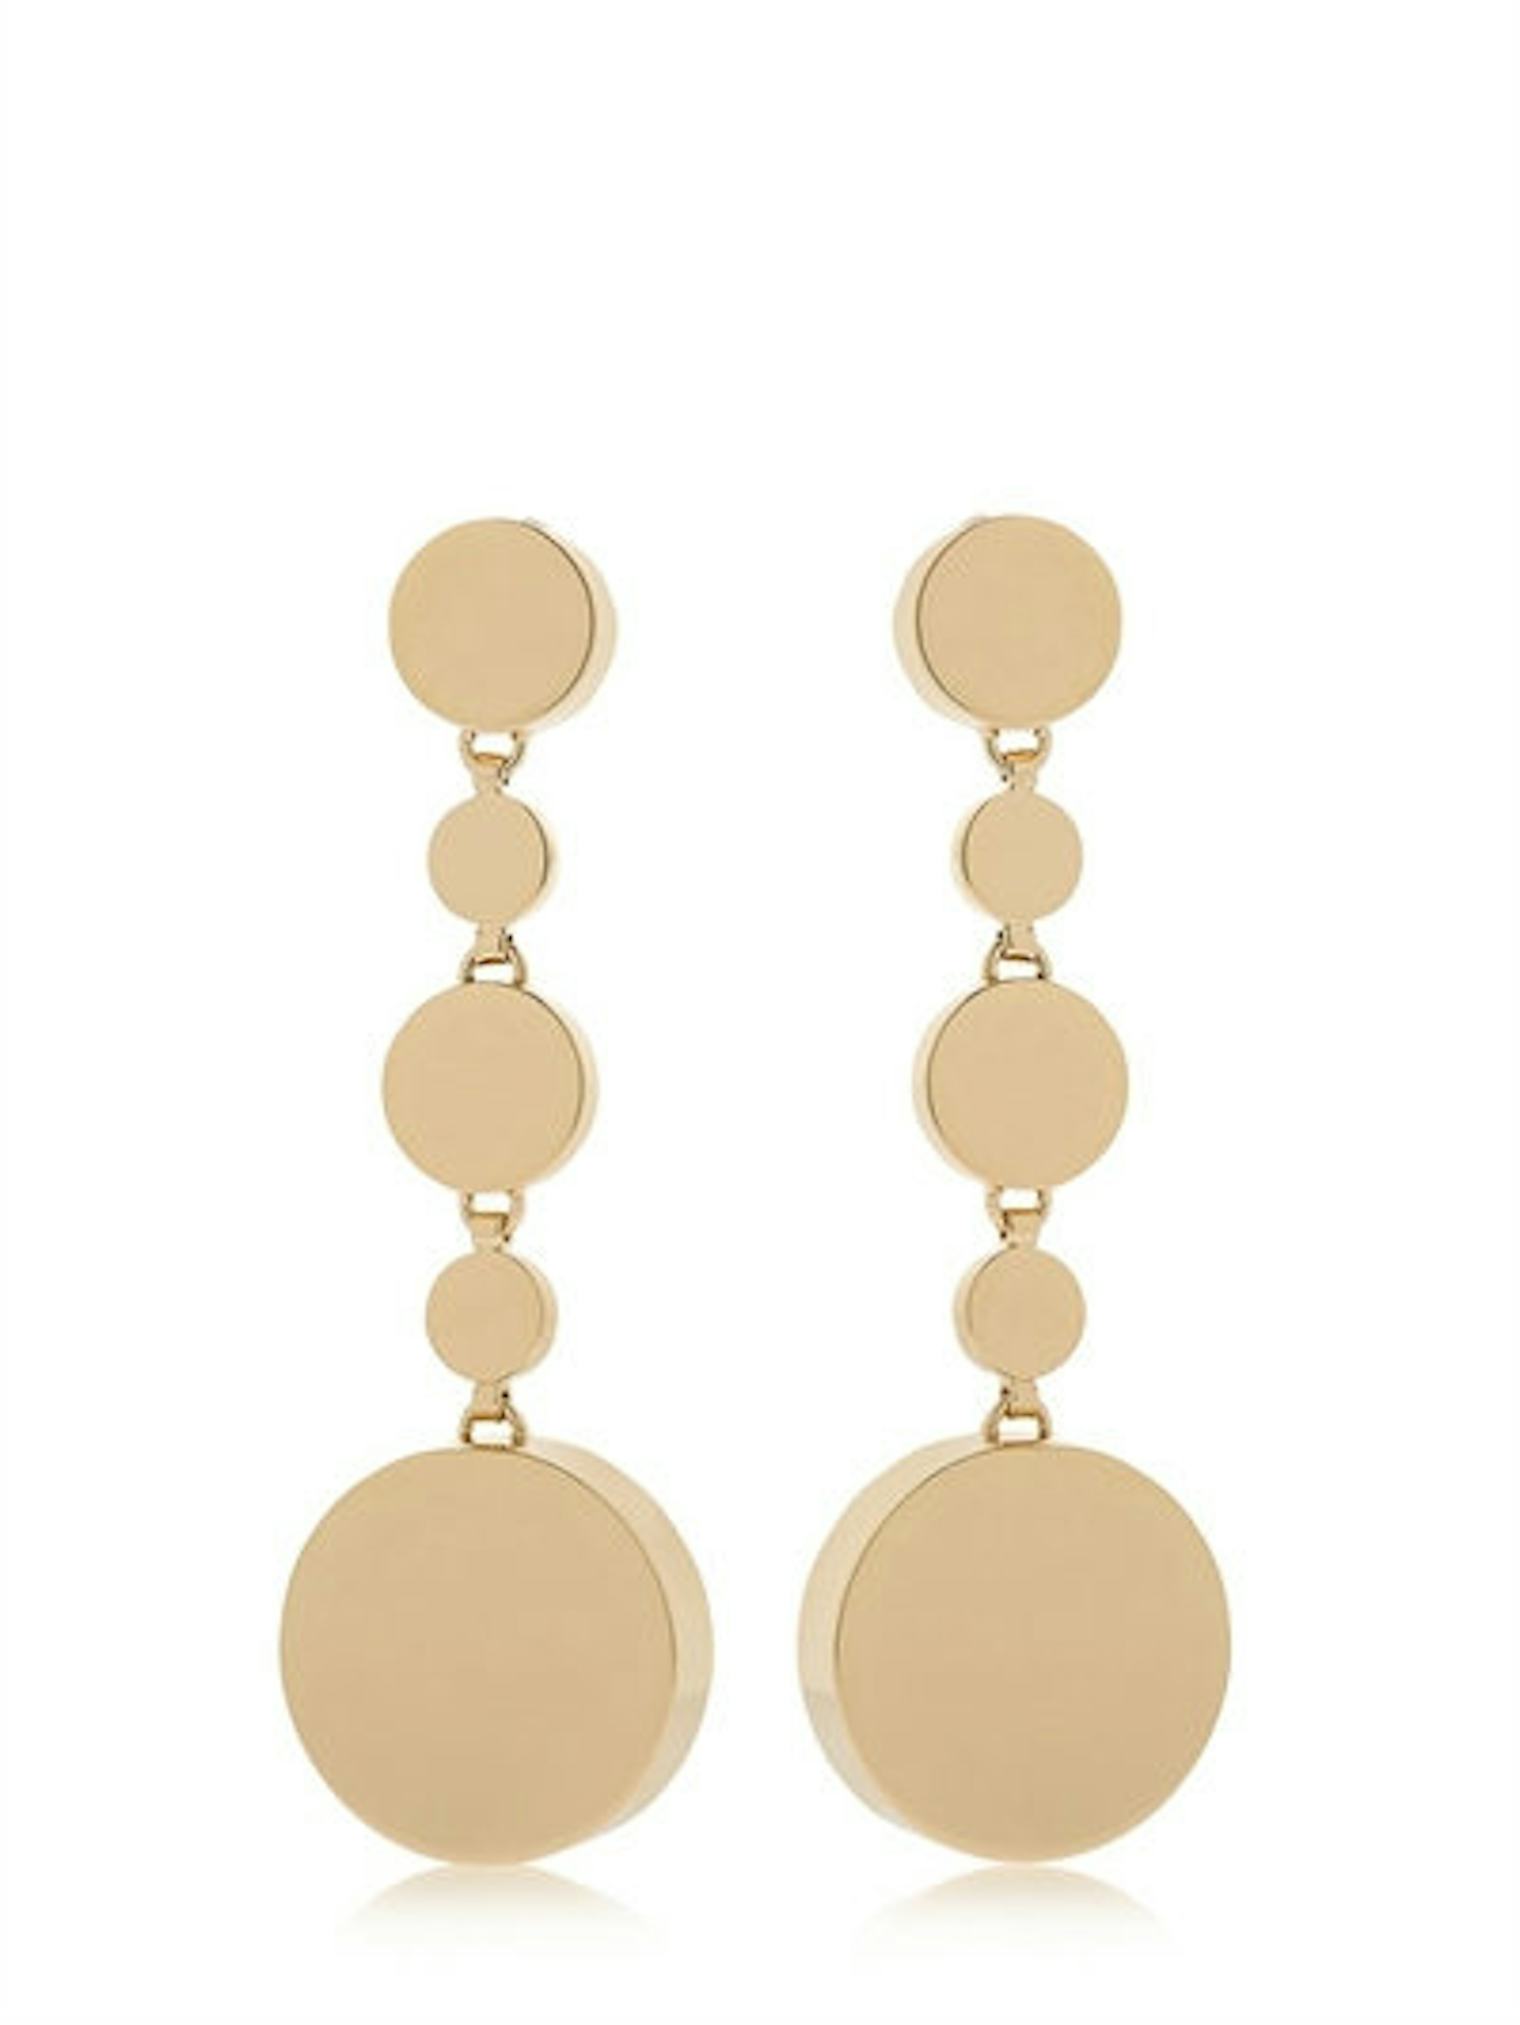 17 Shoulder Duster Earrings To Rock This Spring